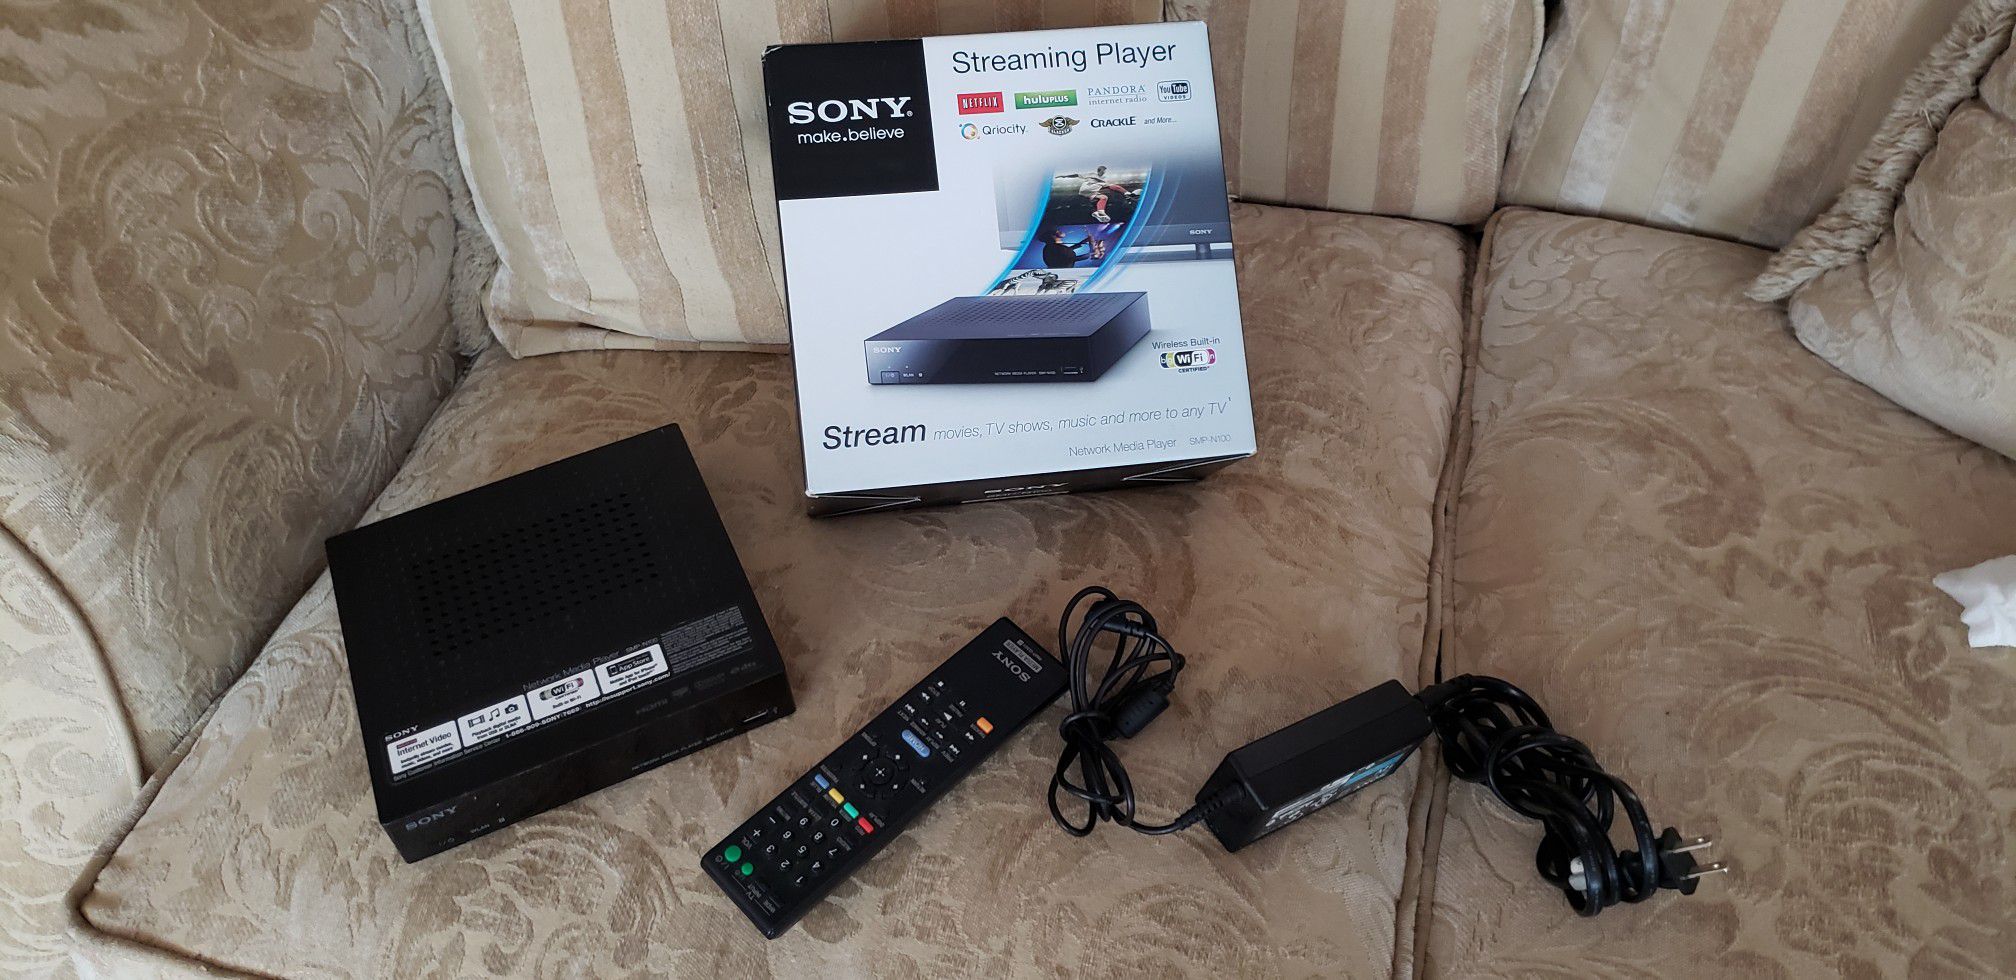 Sony streaming player